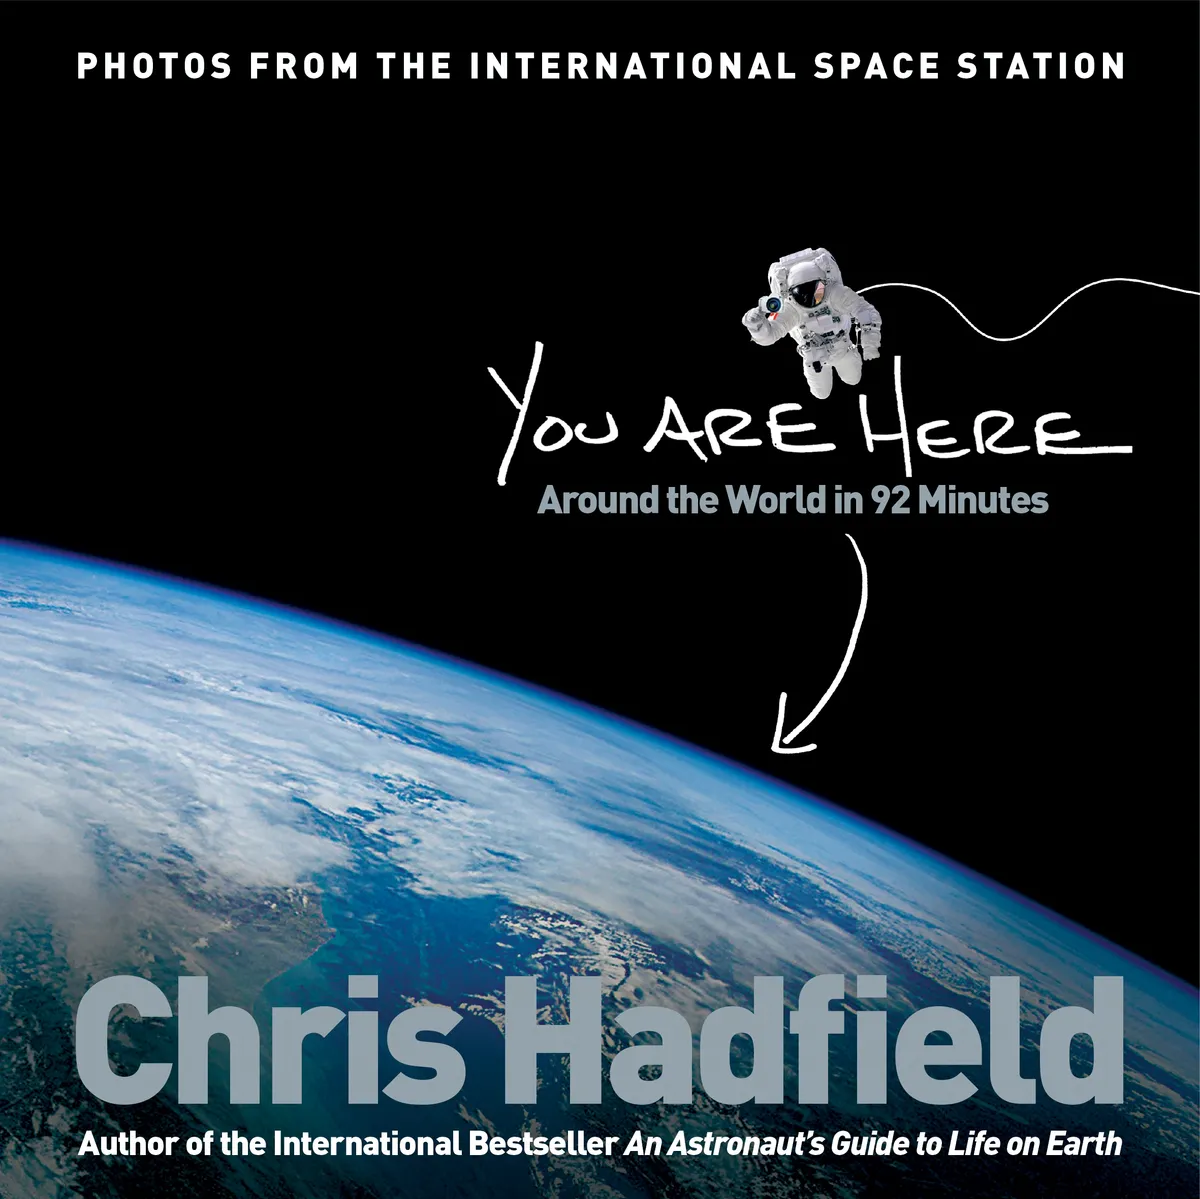 Chris Hadfield's book You Are Here: Around the World in 92 Minutes is out now on Macmillan, £20